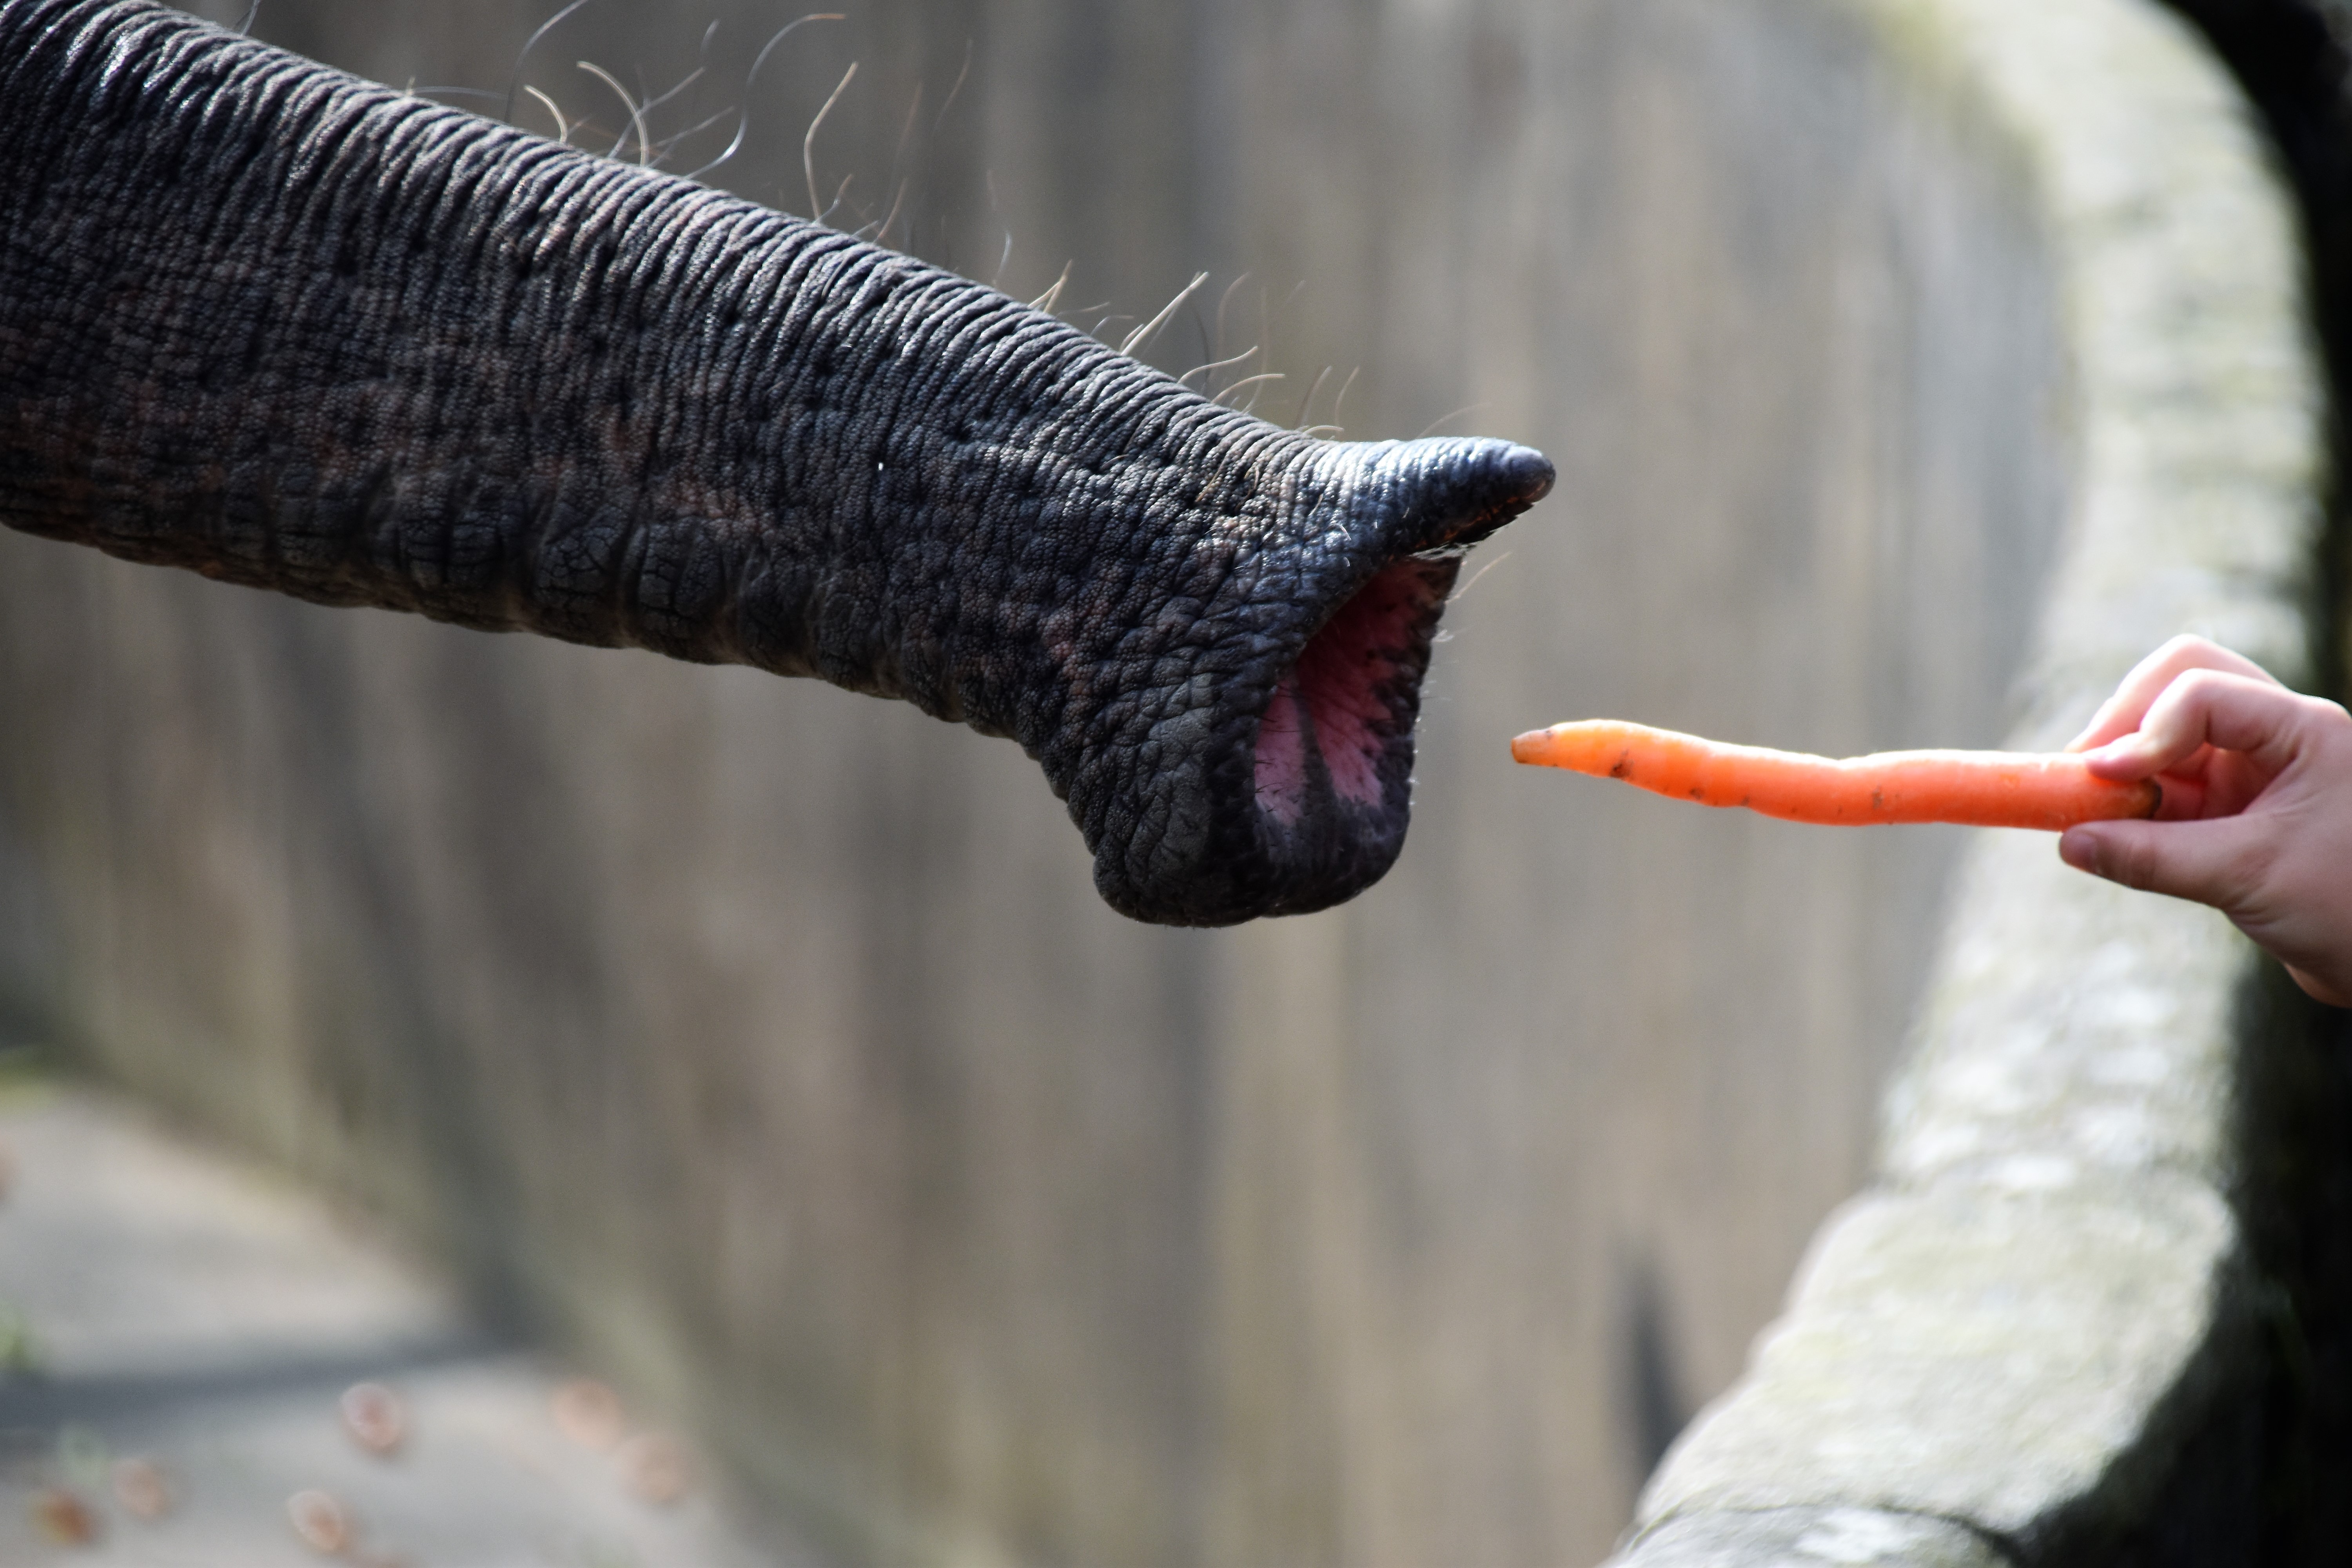 Elephant trunk reaching out to take a carrot from a person's hand